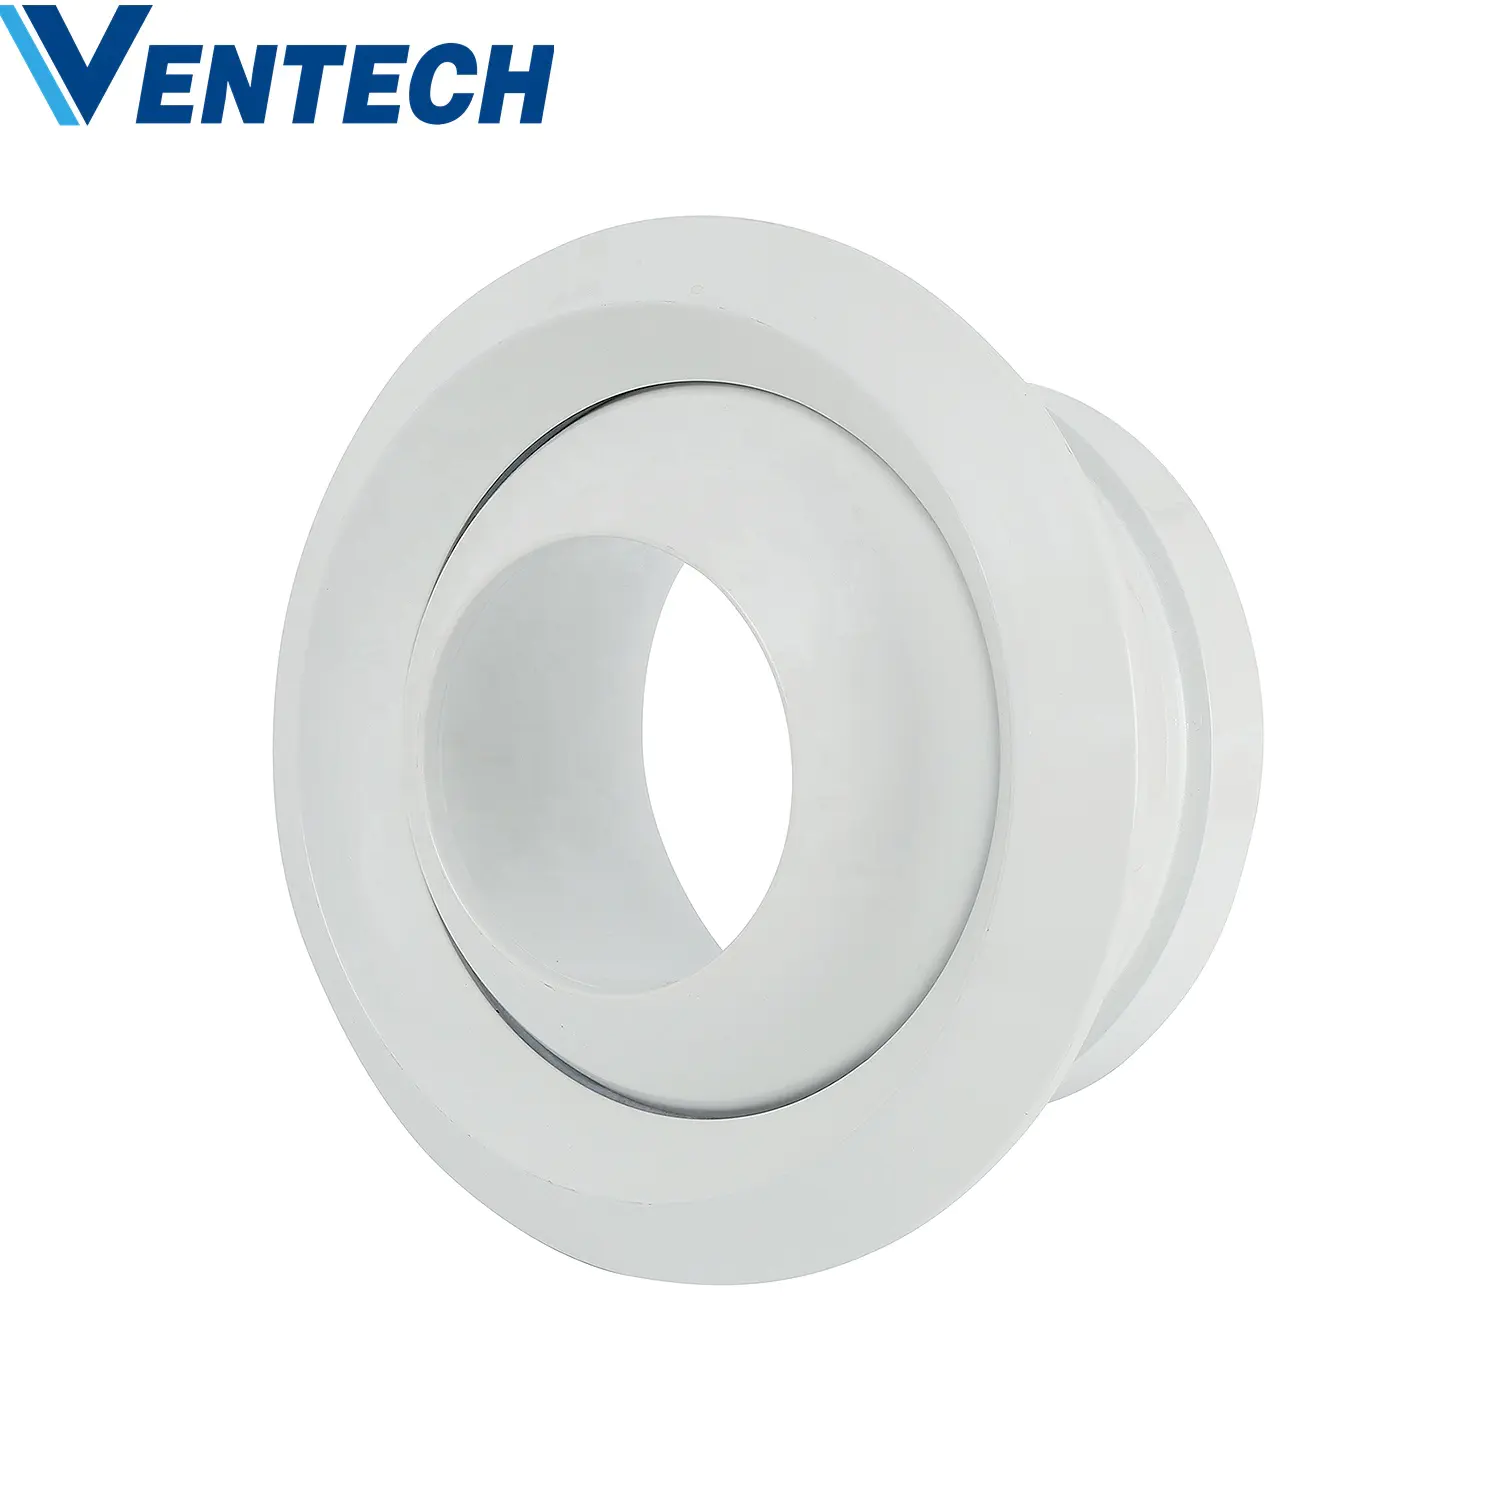 Hvac System Aluminium Supply Air Ceiling Duct Diffuser Conditioning Round Ball Spout Jet Air Nozzle Diffuser